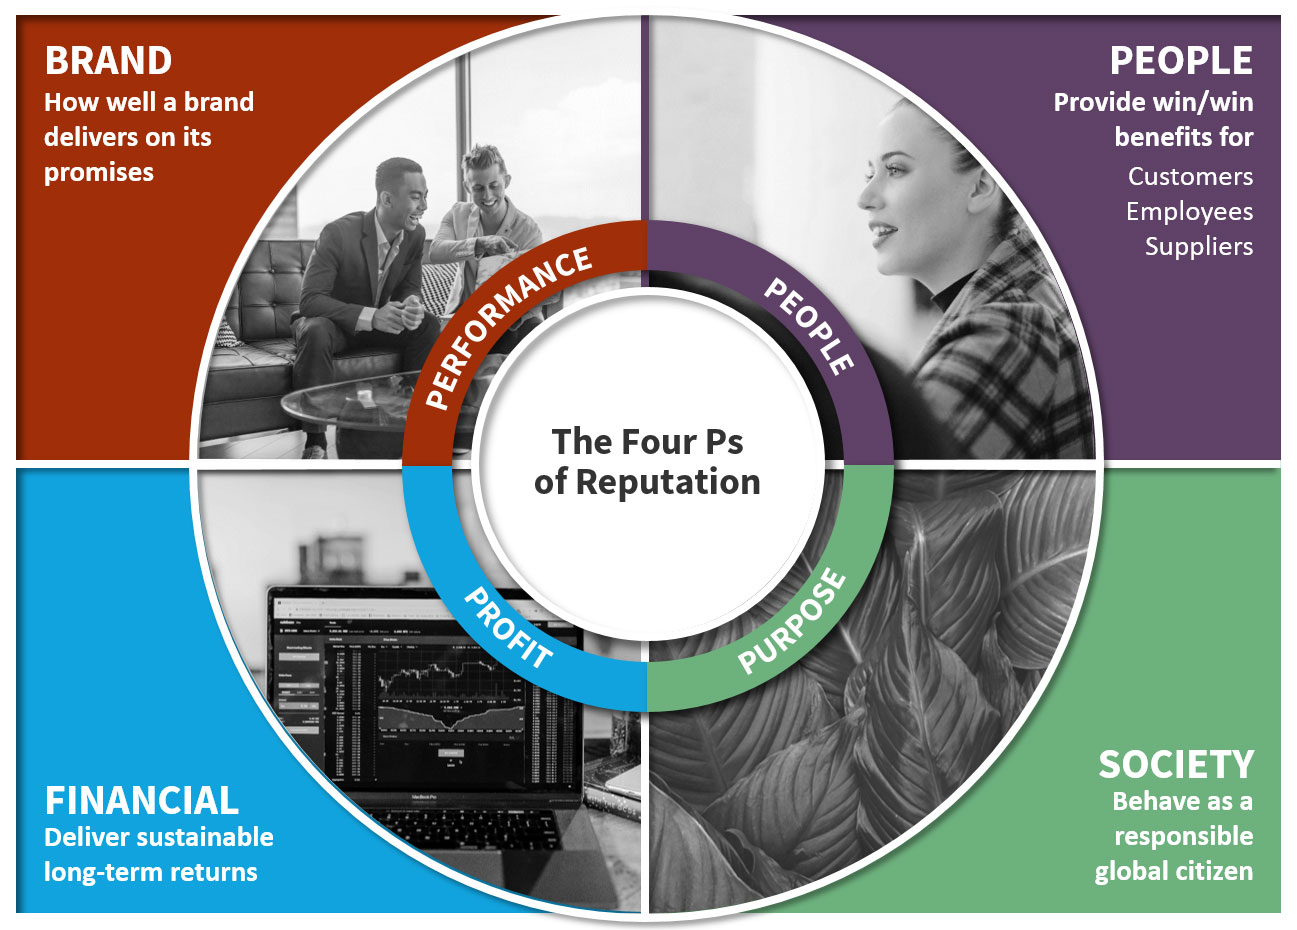 A diagram about the four Ps of reputation: Brand, People, Society, and Financial. Here's what the text in the image likely explains about the four Ps of Reputation: Brand How well a brand delivers on its promises Benefits it provides to customers, employees, and suppliers People Achieve win-win benefits for all stakeholders Society Behave as a responsible global citizen Deliver sustainable long-term returns Financial Achieve profitability The overall message is that a strong reputation is built on a foundation that considers the needs of all stakeholders, including customers, employees, suppliers, and society as a whole, while also achieving financial success.